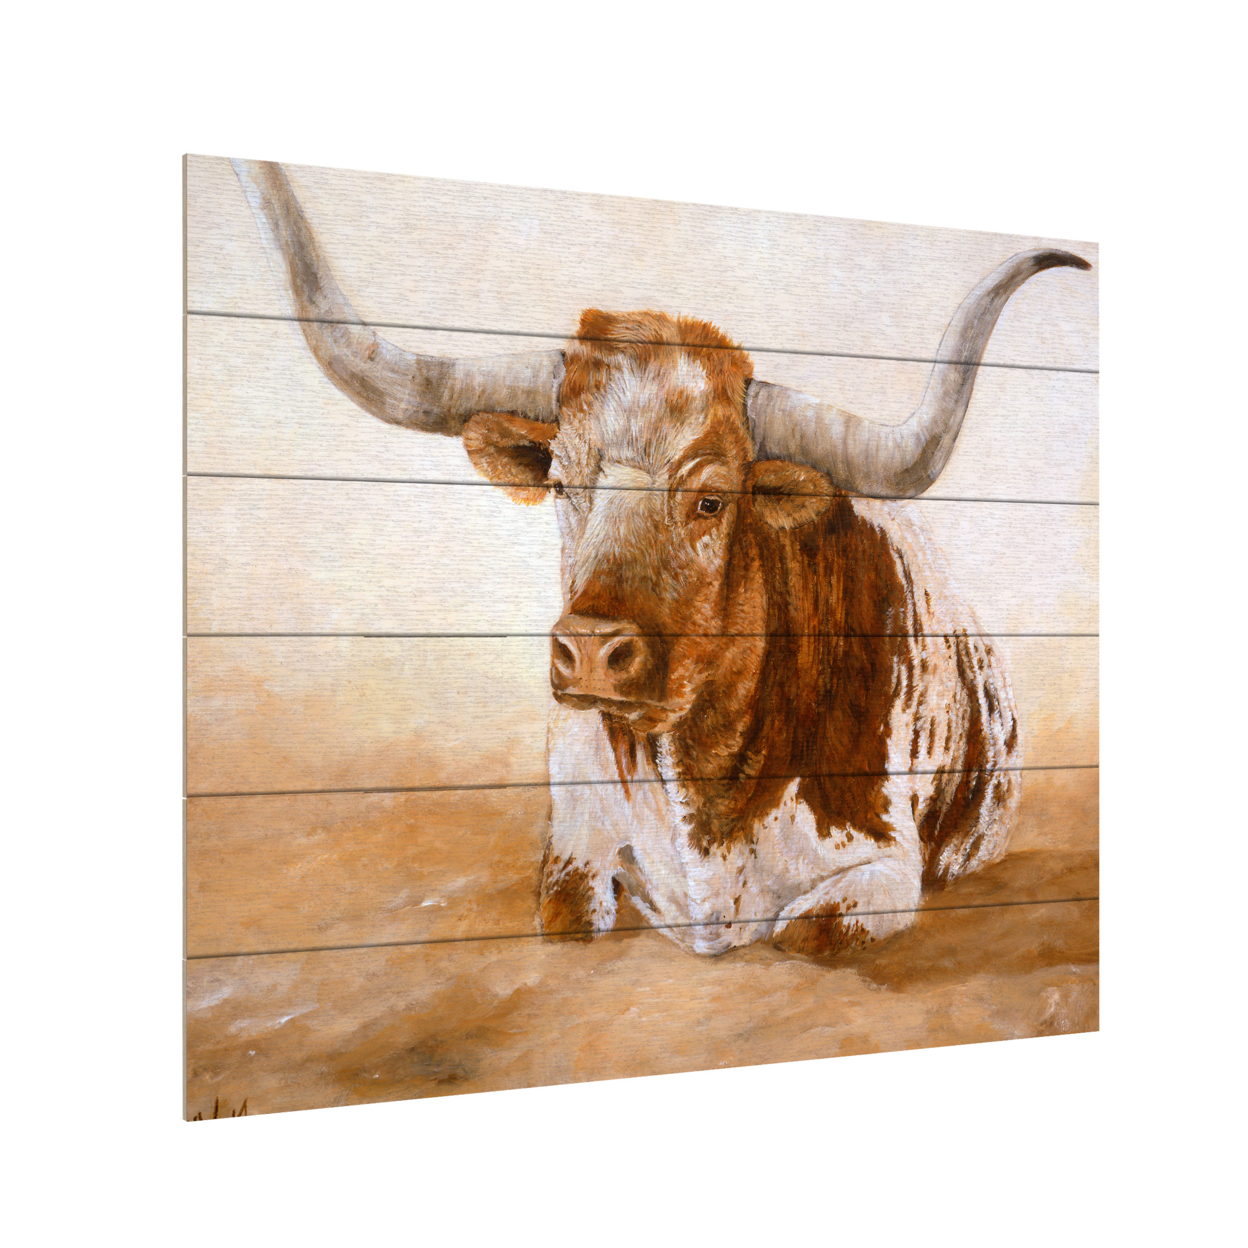 Wooden Slat Art 18 X 22 Inches Titled Easy Rider Cows Ready To Hang Home Decor Picture